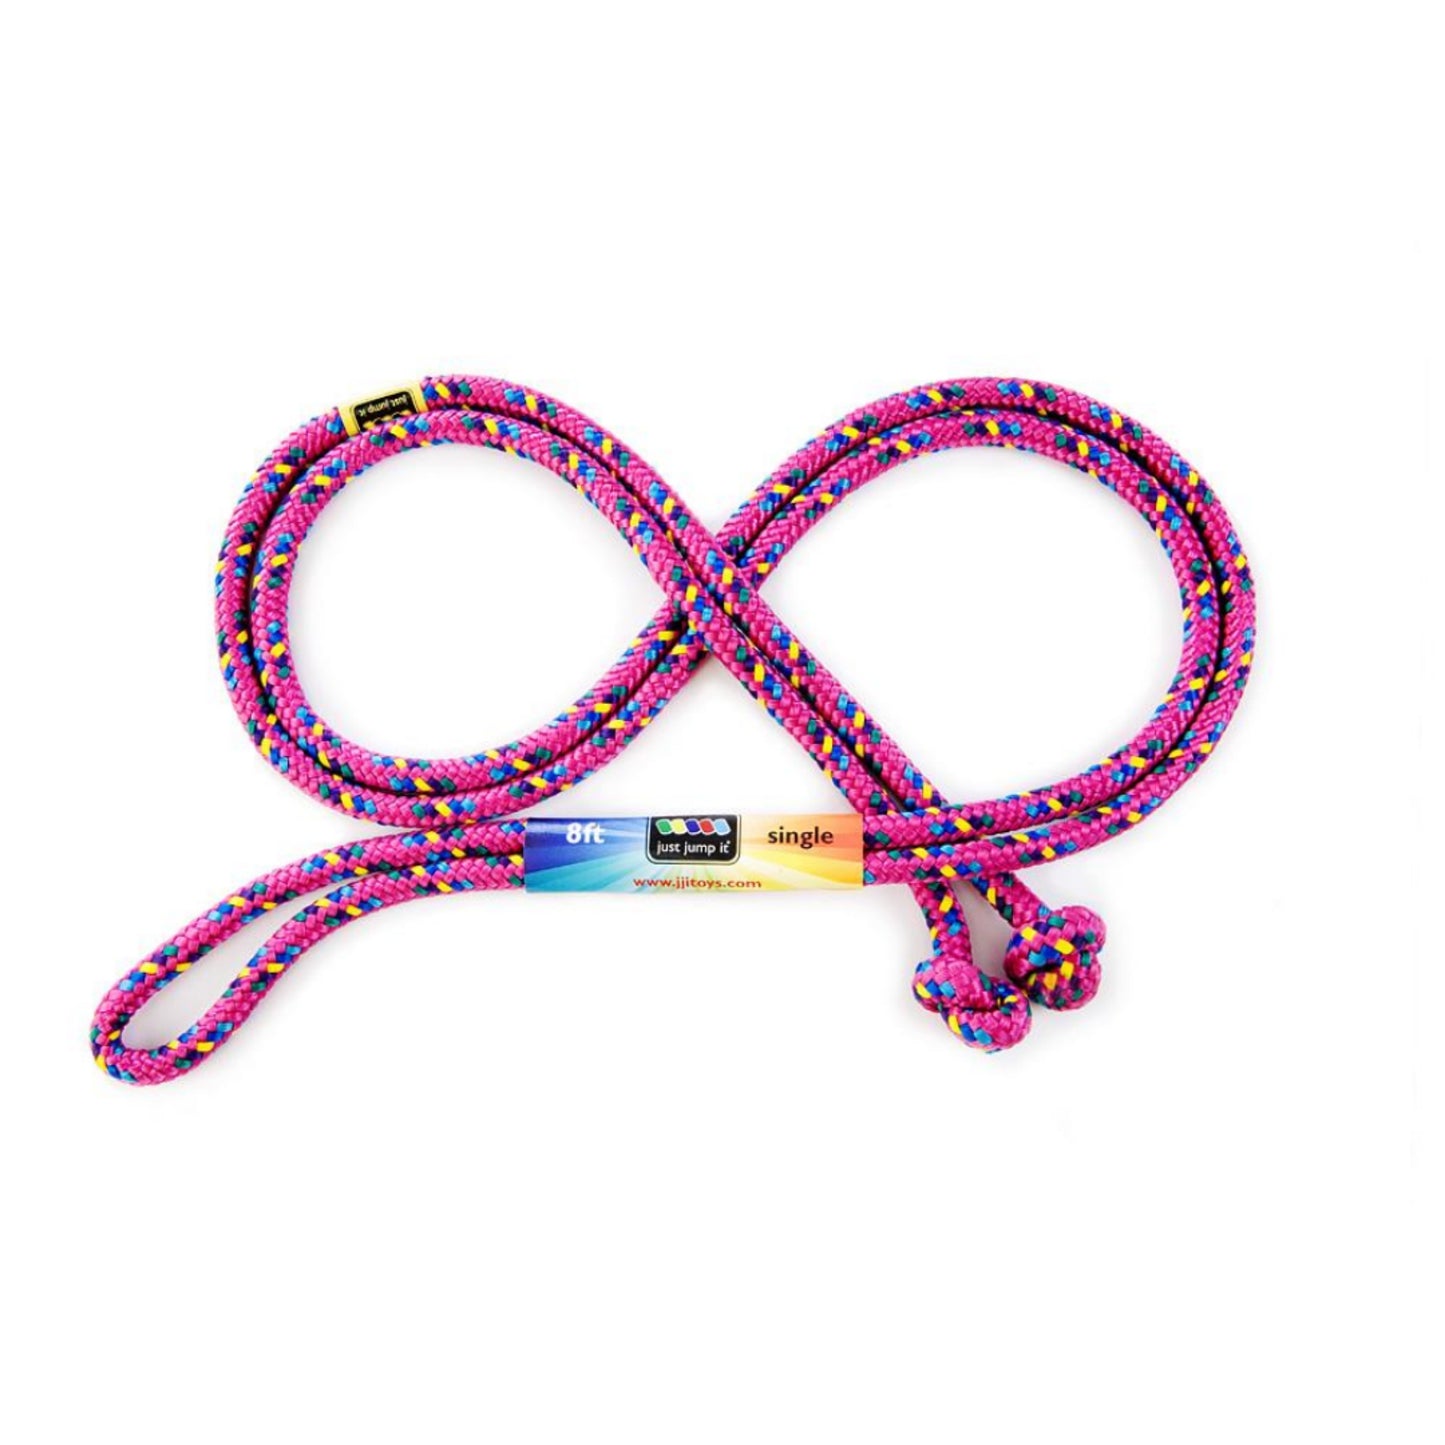 8' Confetti Single Jump Rope - Lots of Color Choices